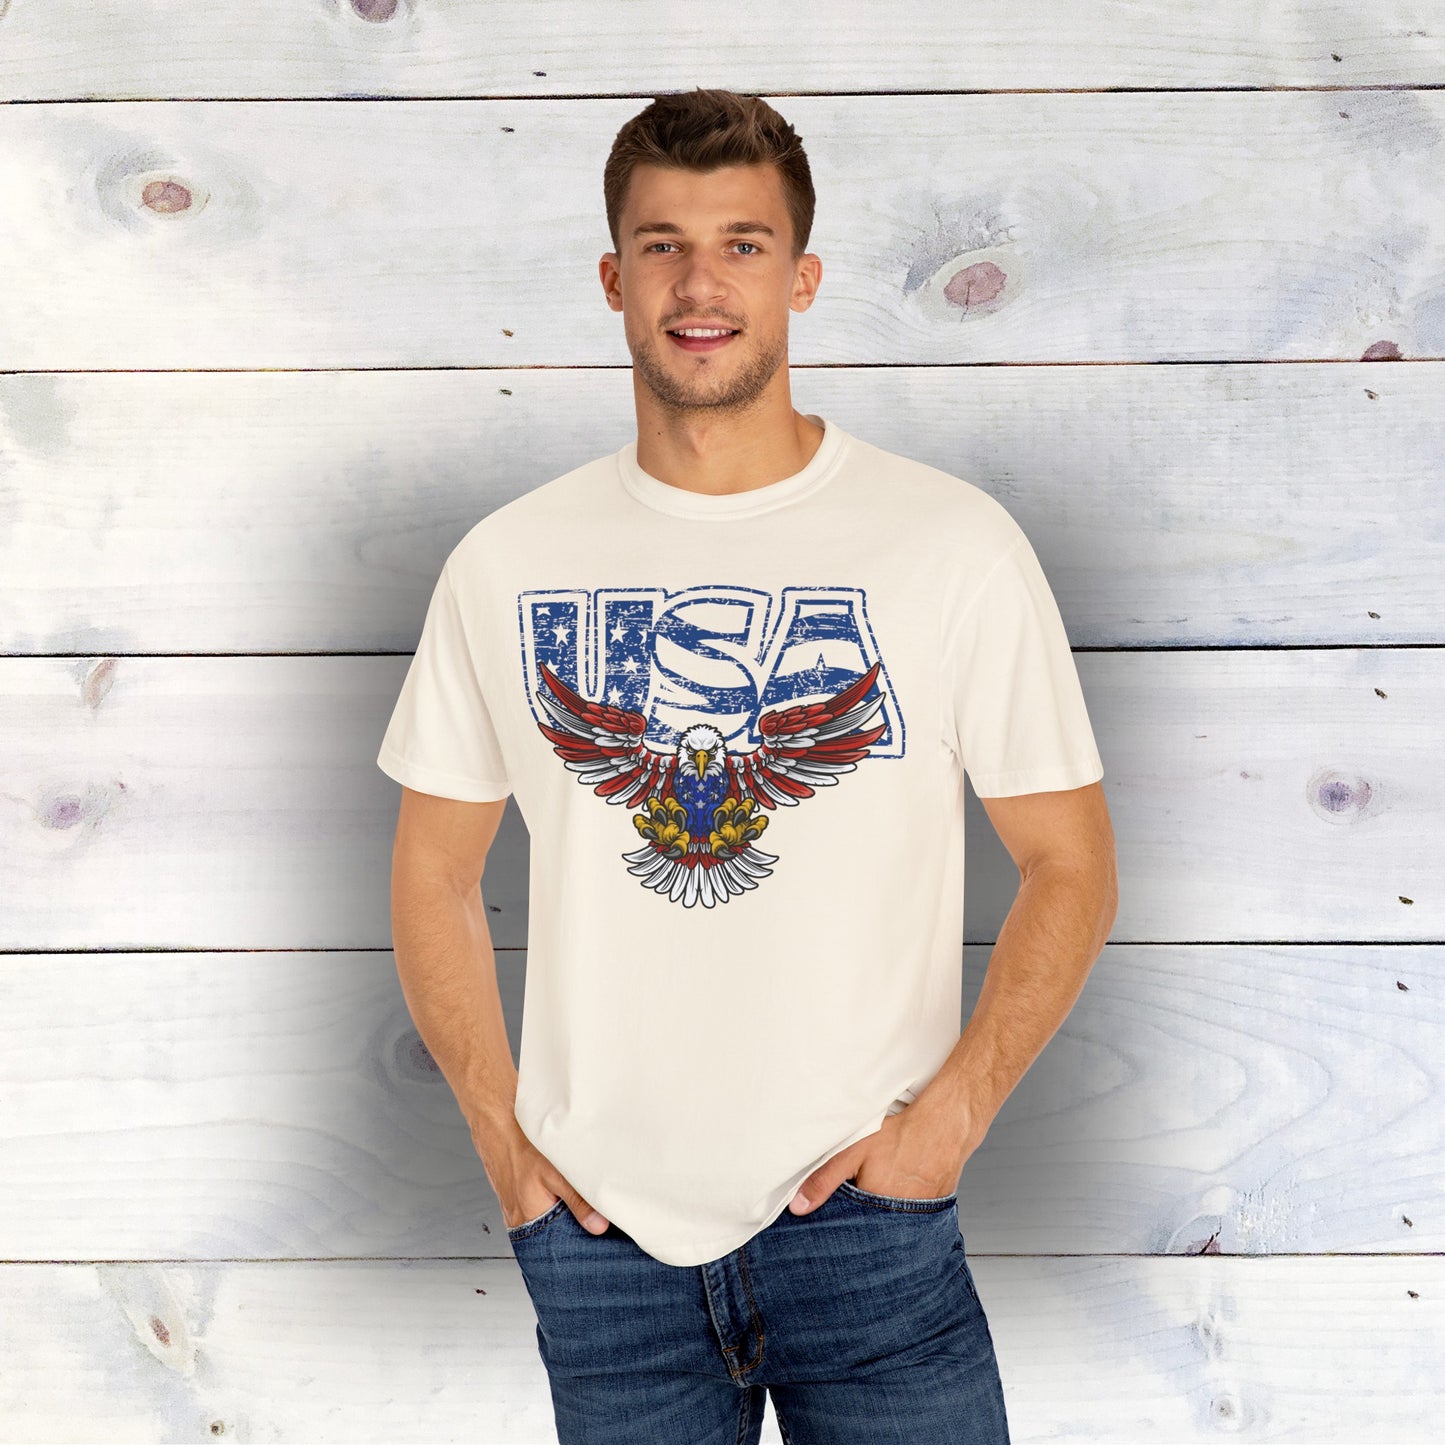 USA Themed Comfort Colors 1717 Garment-Dyed T-Shirt - 100% Ring-Spun Cotton, Relaxed Fit